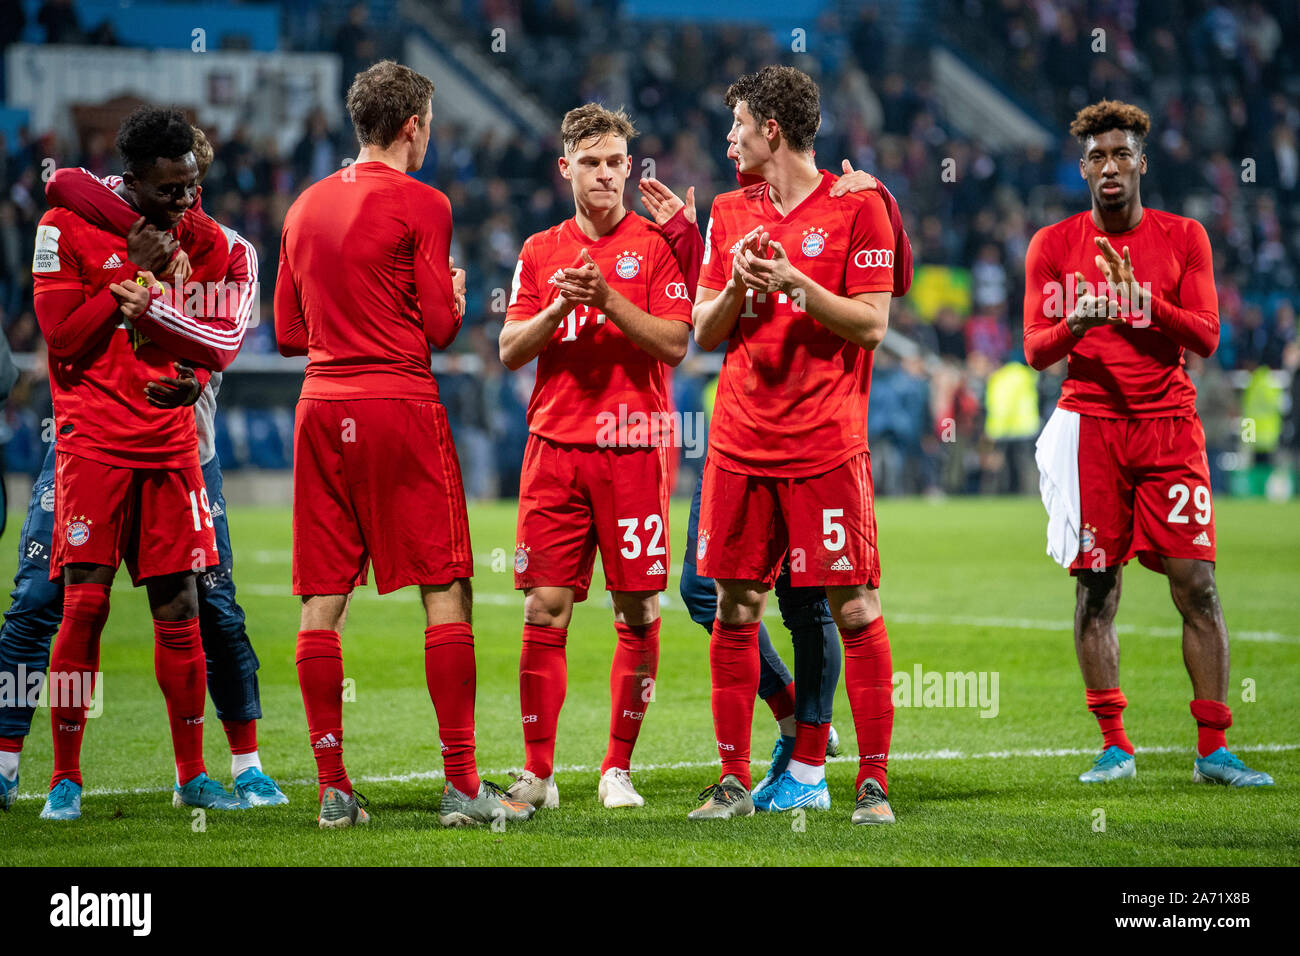 Bochum, Germany. 29th Oct, 2019. Soccer: DFB Cup, VfL Bochum - Bayern Munich, 2nd round in the Vonovia Ruhr Stadium. (l-r) Munich's Alphonso Davies, Thomas Müller, Joshua Kimmich, Benjamin Pavard and Kingsley Coman thank the fans after the final whistle. Credit: David Inderlied/dpa - IMPORTANT NOTE: In accordance with the requirements of the DFL Deutsche Fußball Liga or the DFB Deutscher Fußball-Bund, it is prohibited to use or have used photographs taken in the stadium and/or the match in the form of sequence images and/or video-like photo sequences./dpa/Alamy Live News Stock Photo